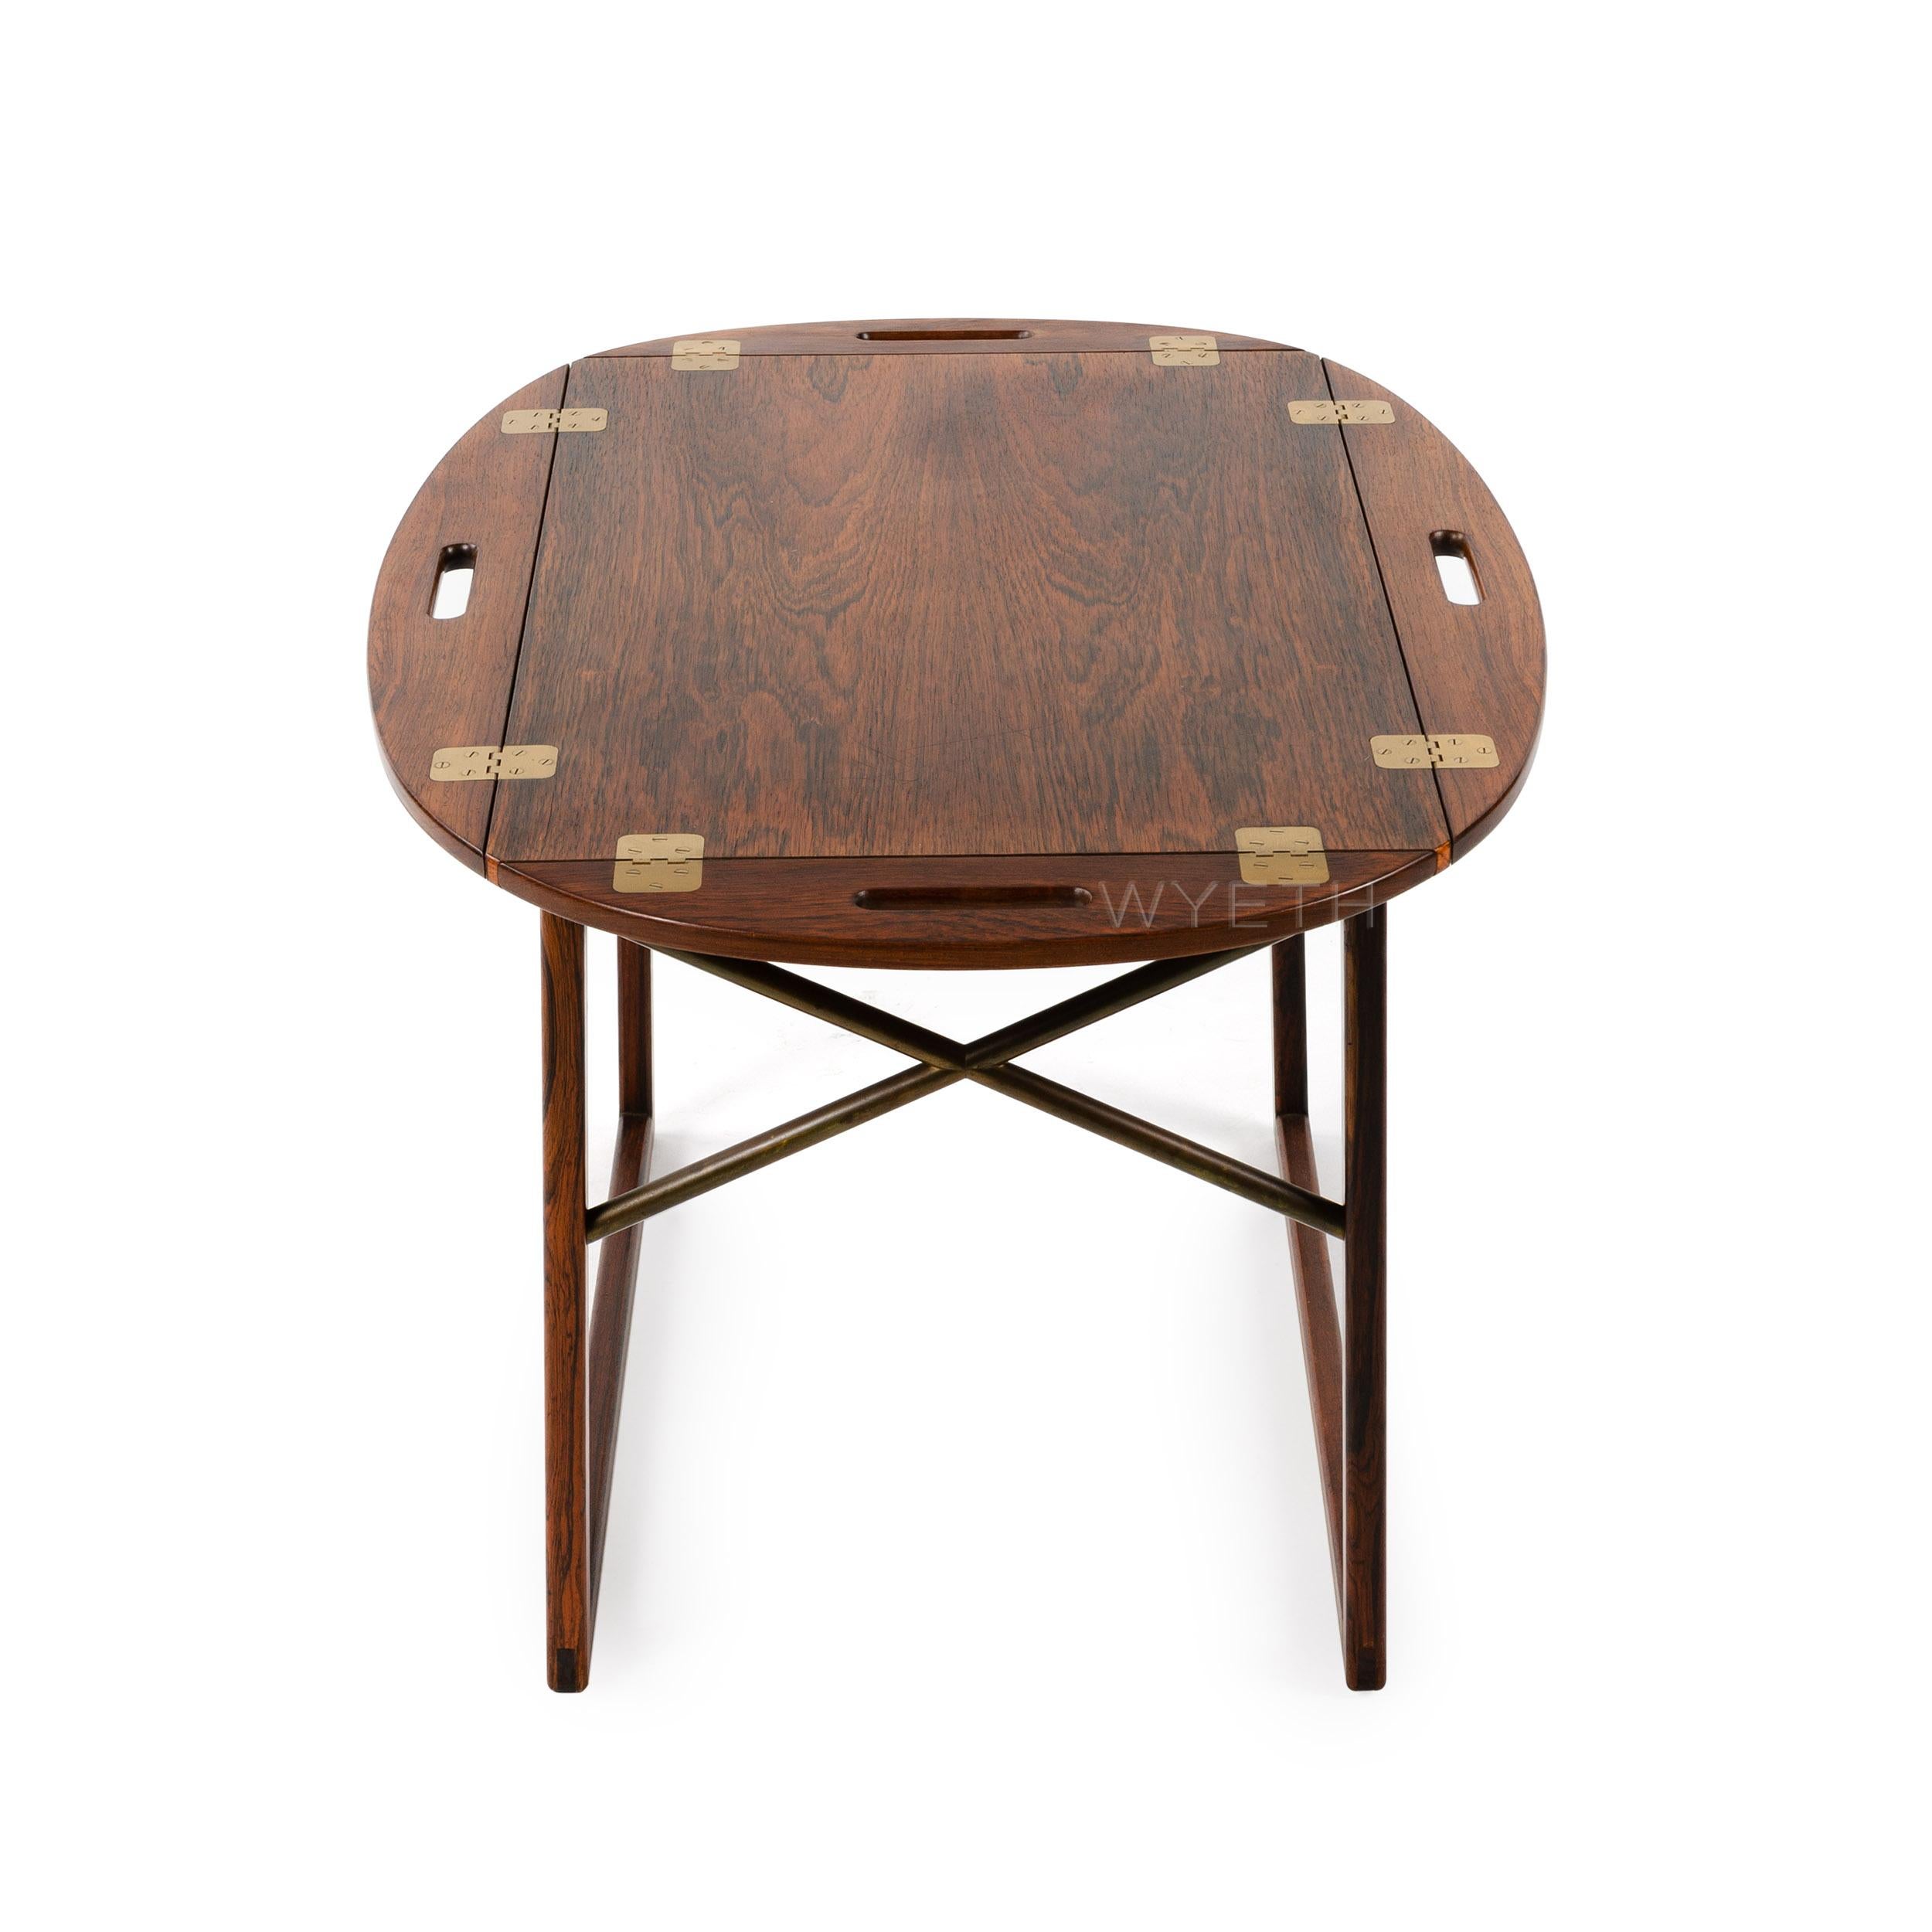 A finely crafted tray table in rich rosewood with a removable tray top. Brass hinged edges flip up to convert to handles.